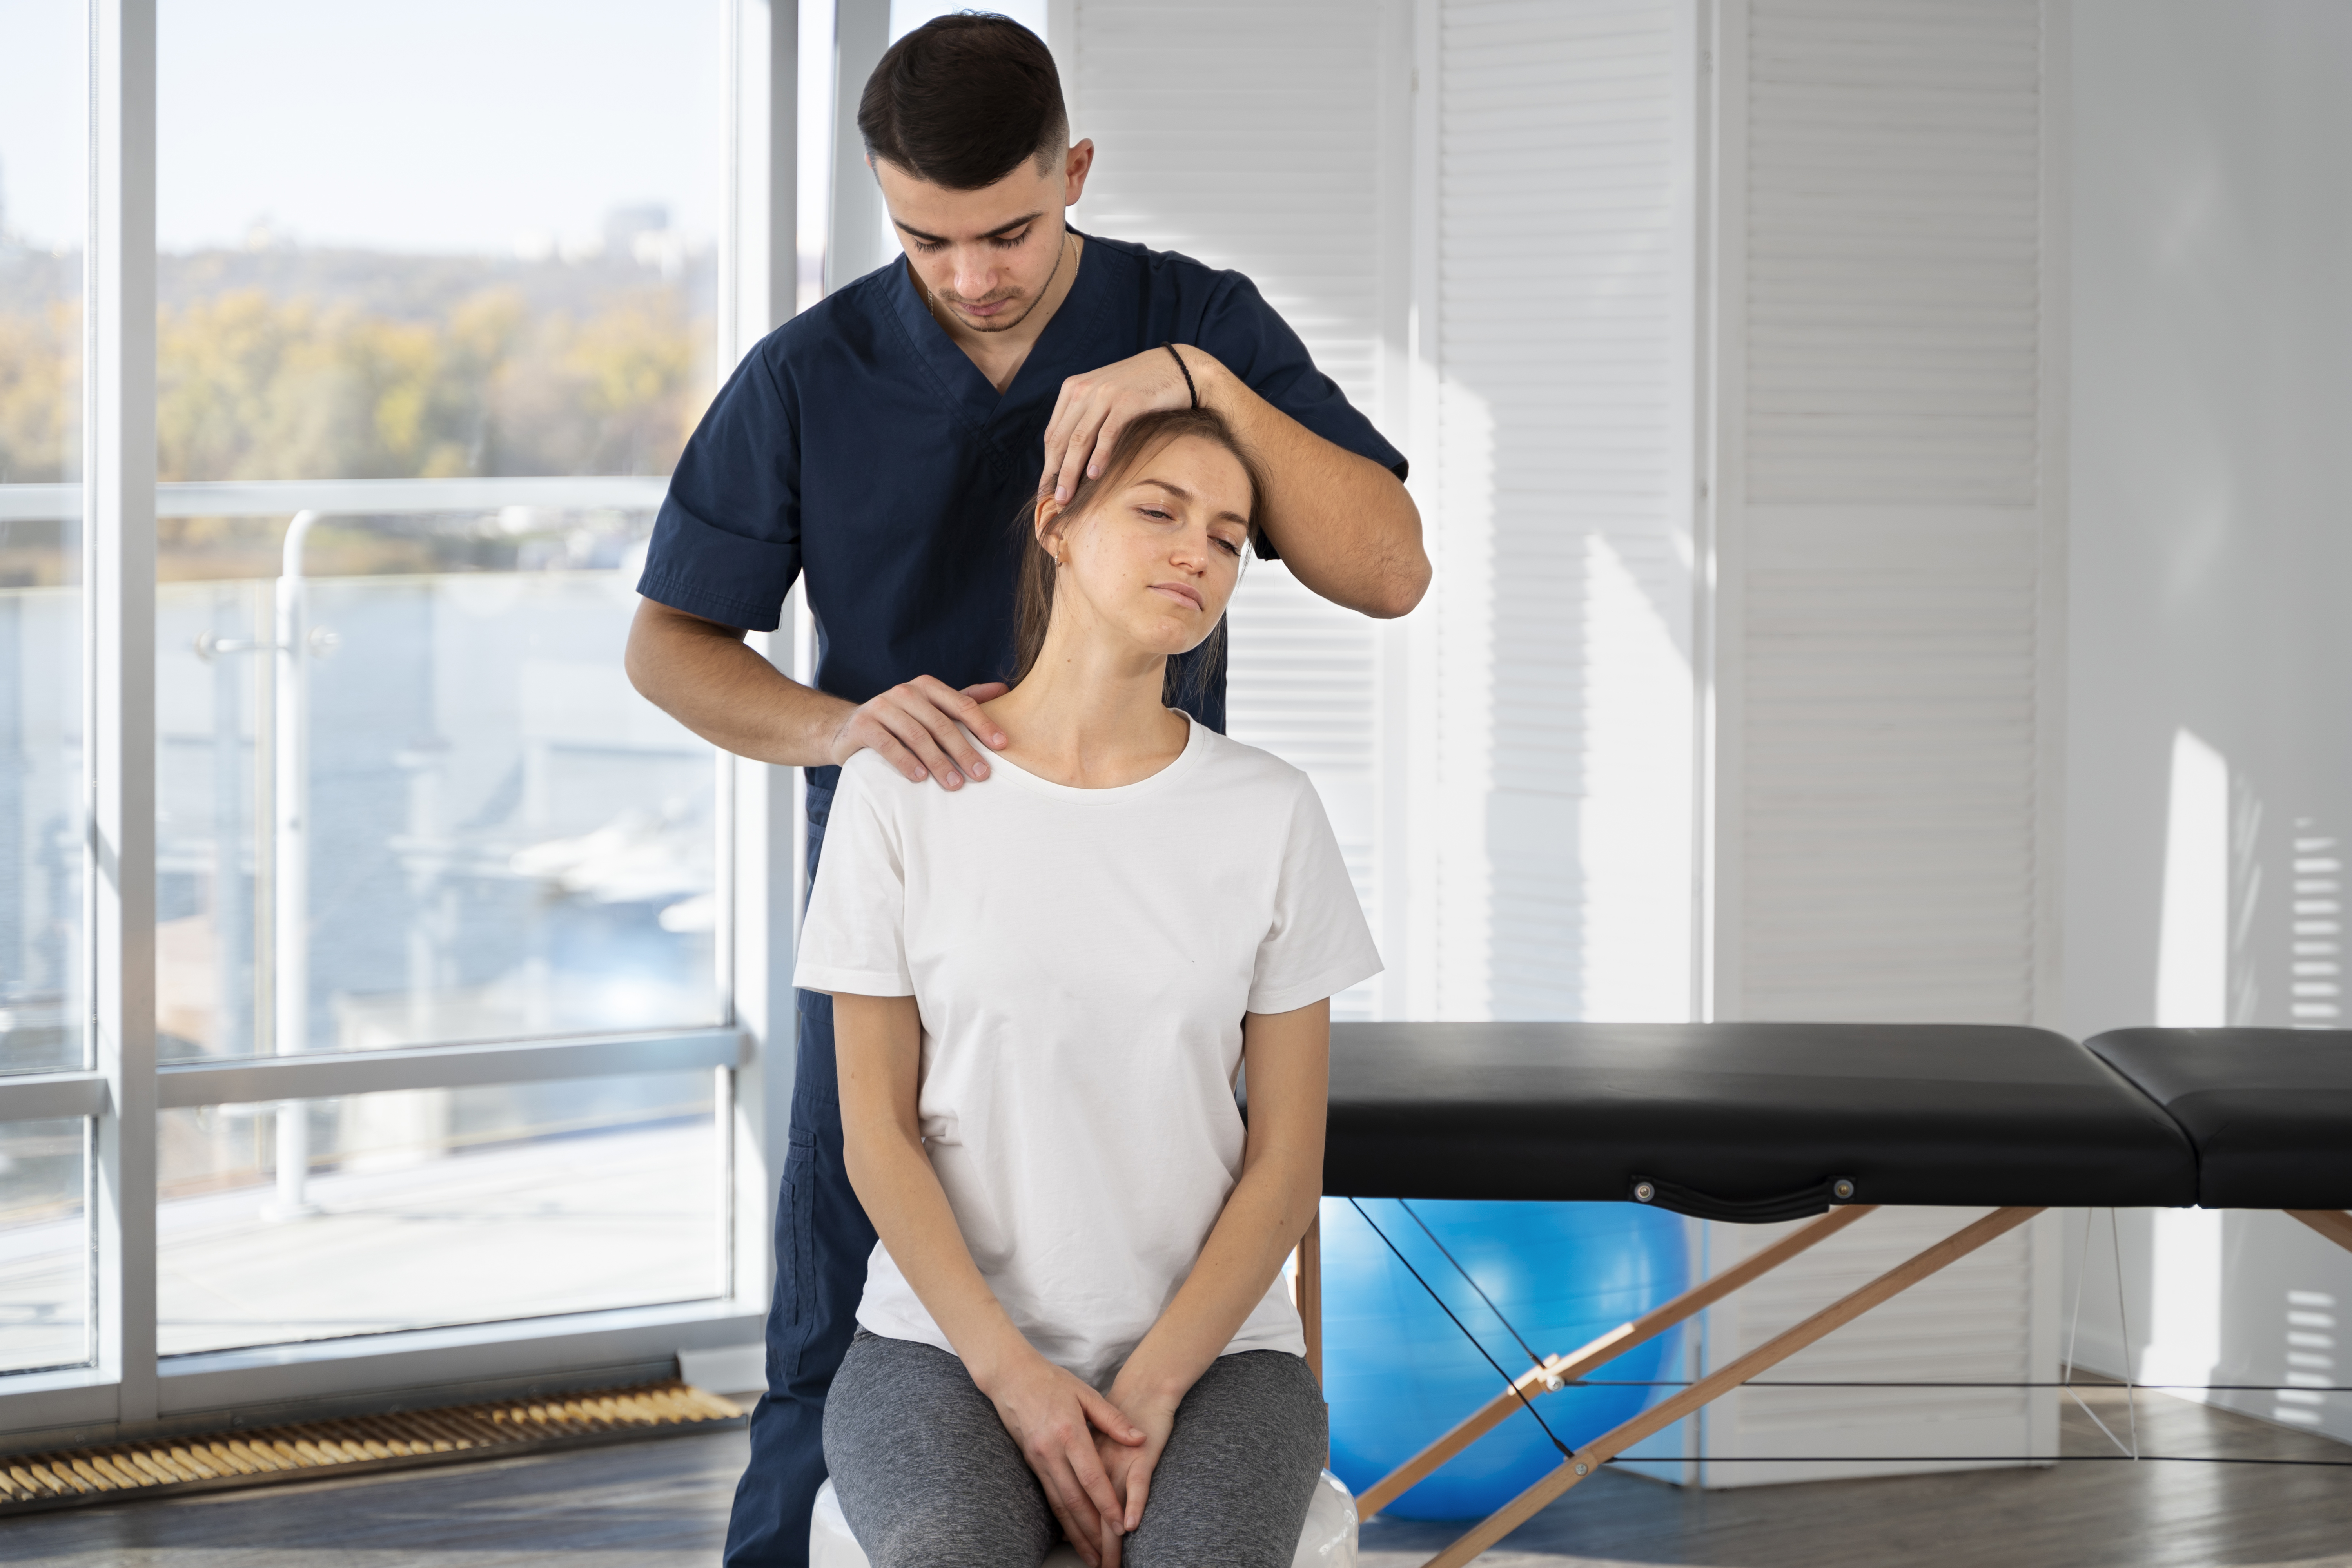 Best Physiotherapy in Delhi